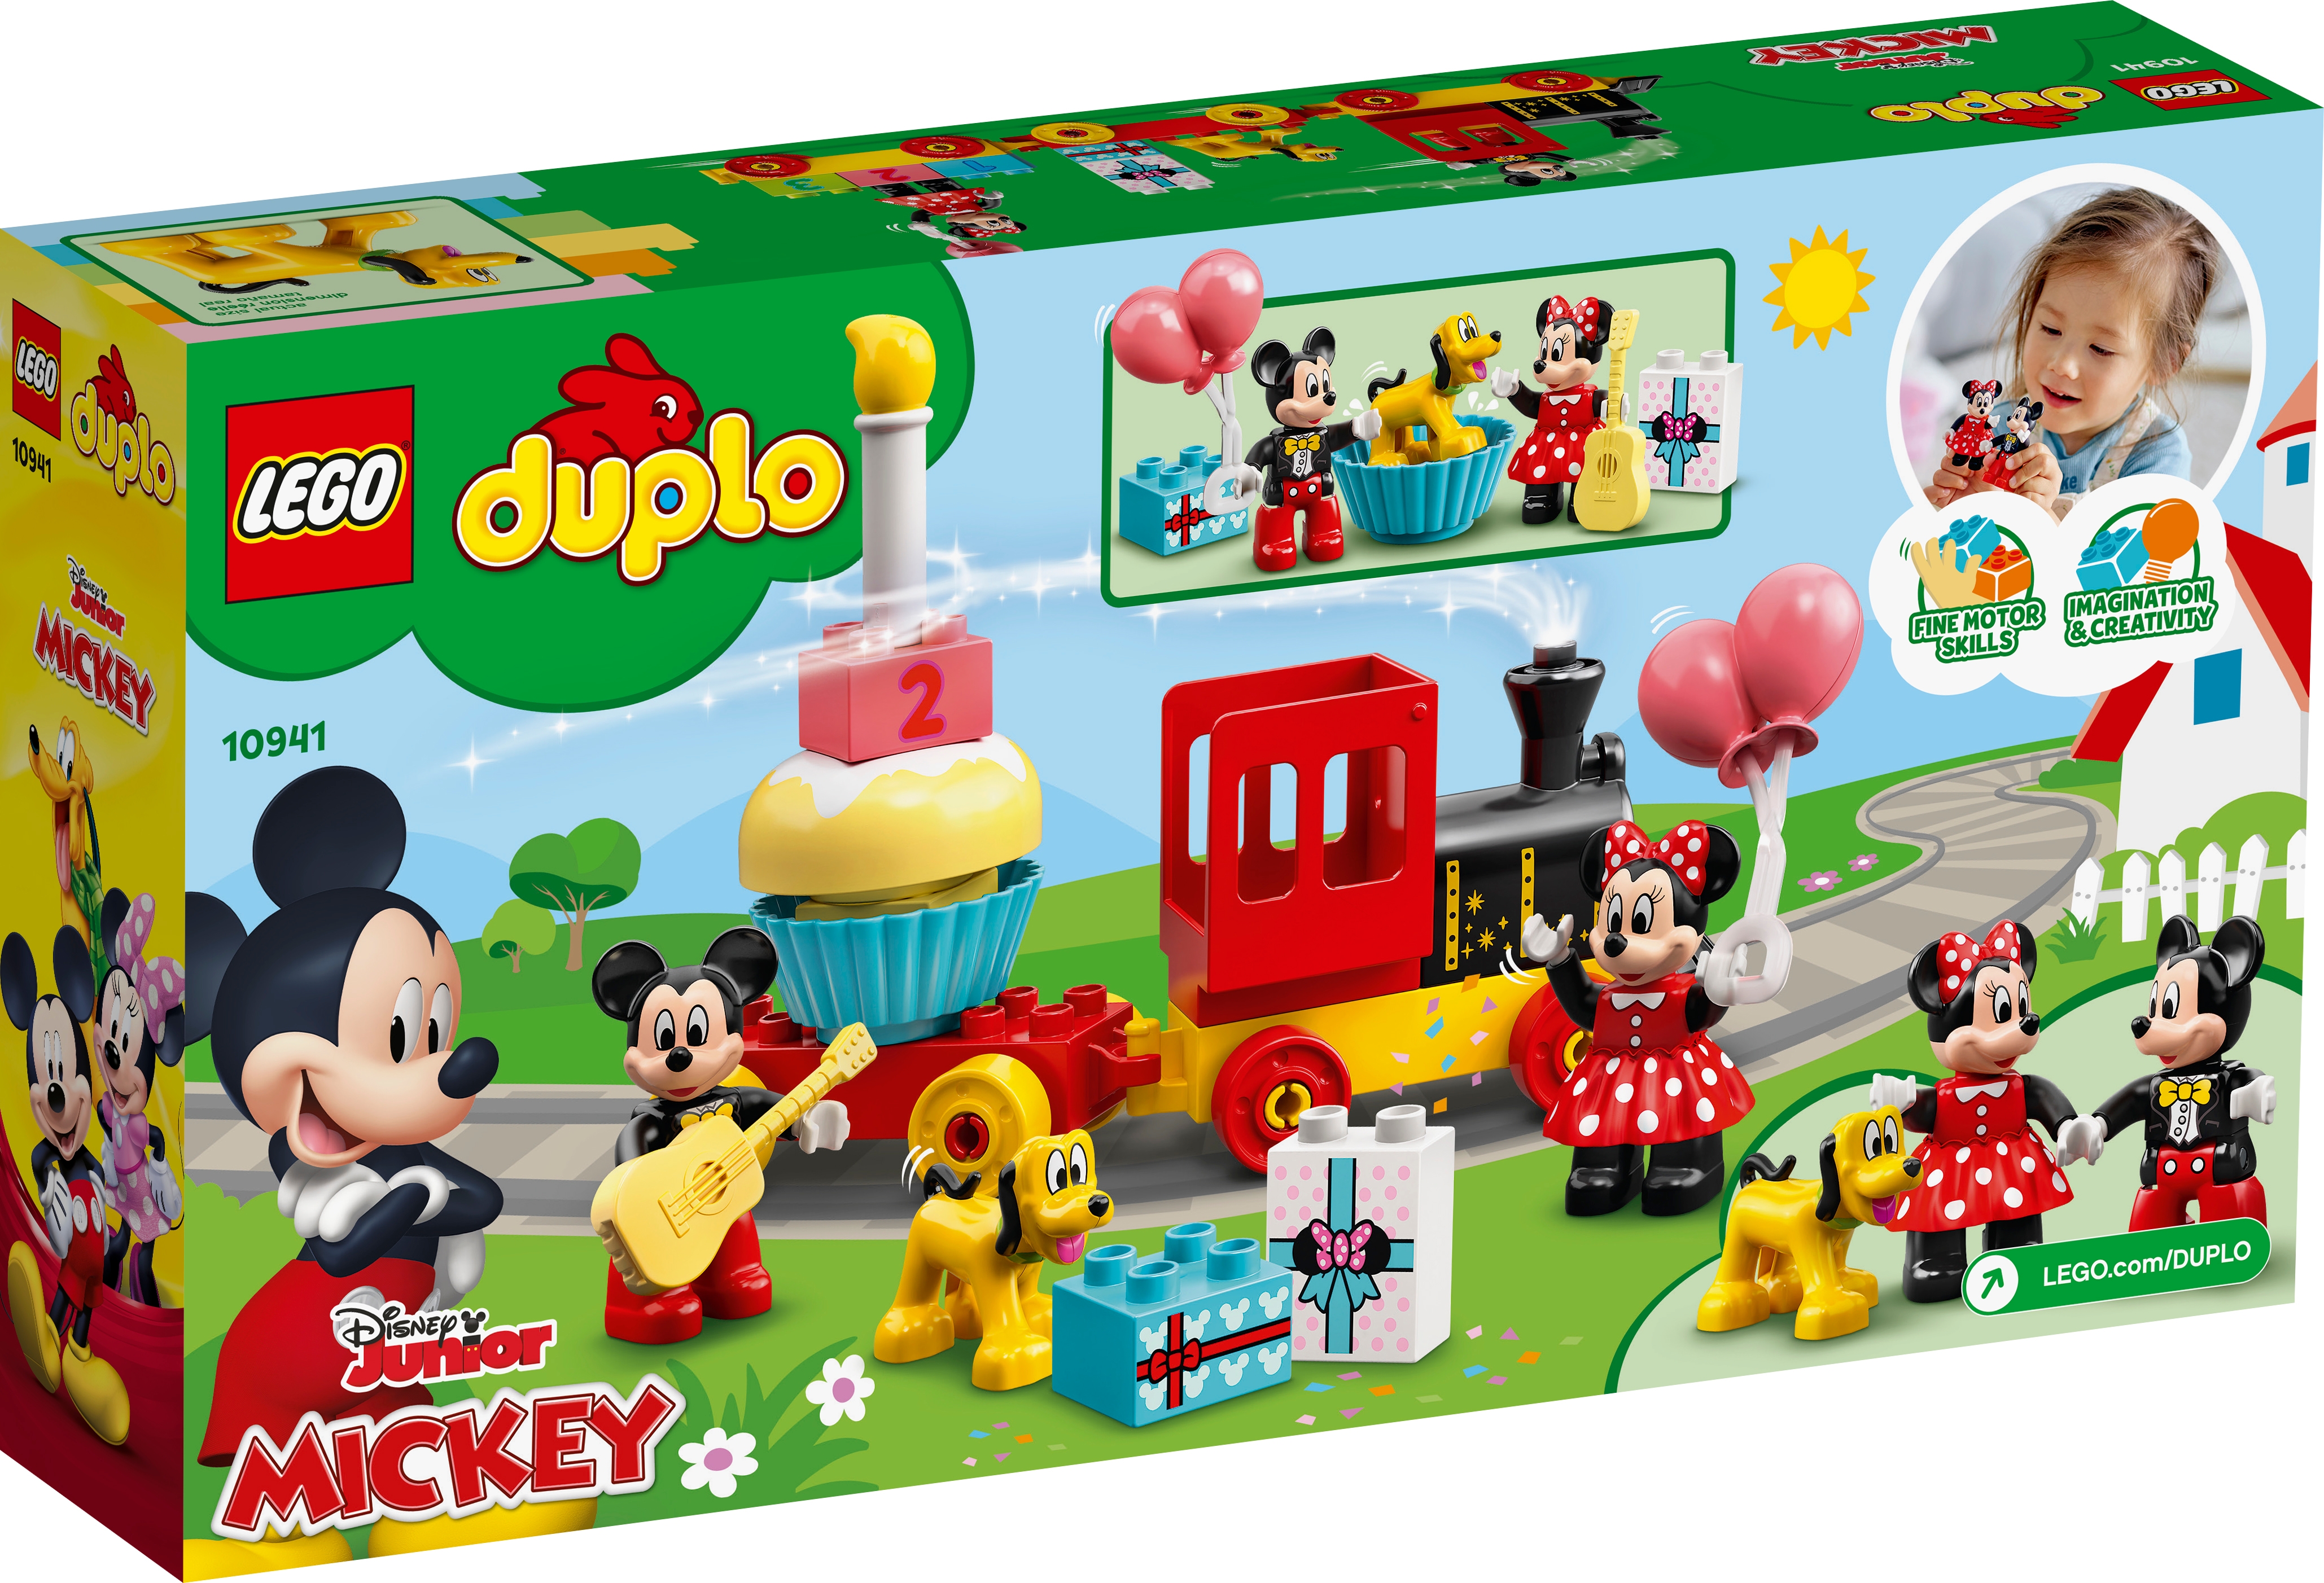 LEGO DUPLO Disney Mickey & Minnie Birthday Train 10941 Kids’ Birthday Number Train; Learning and Building Playset New 2021 22 Pieces 